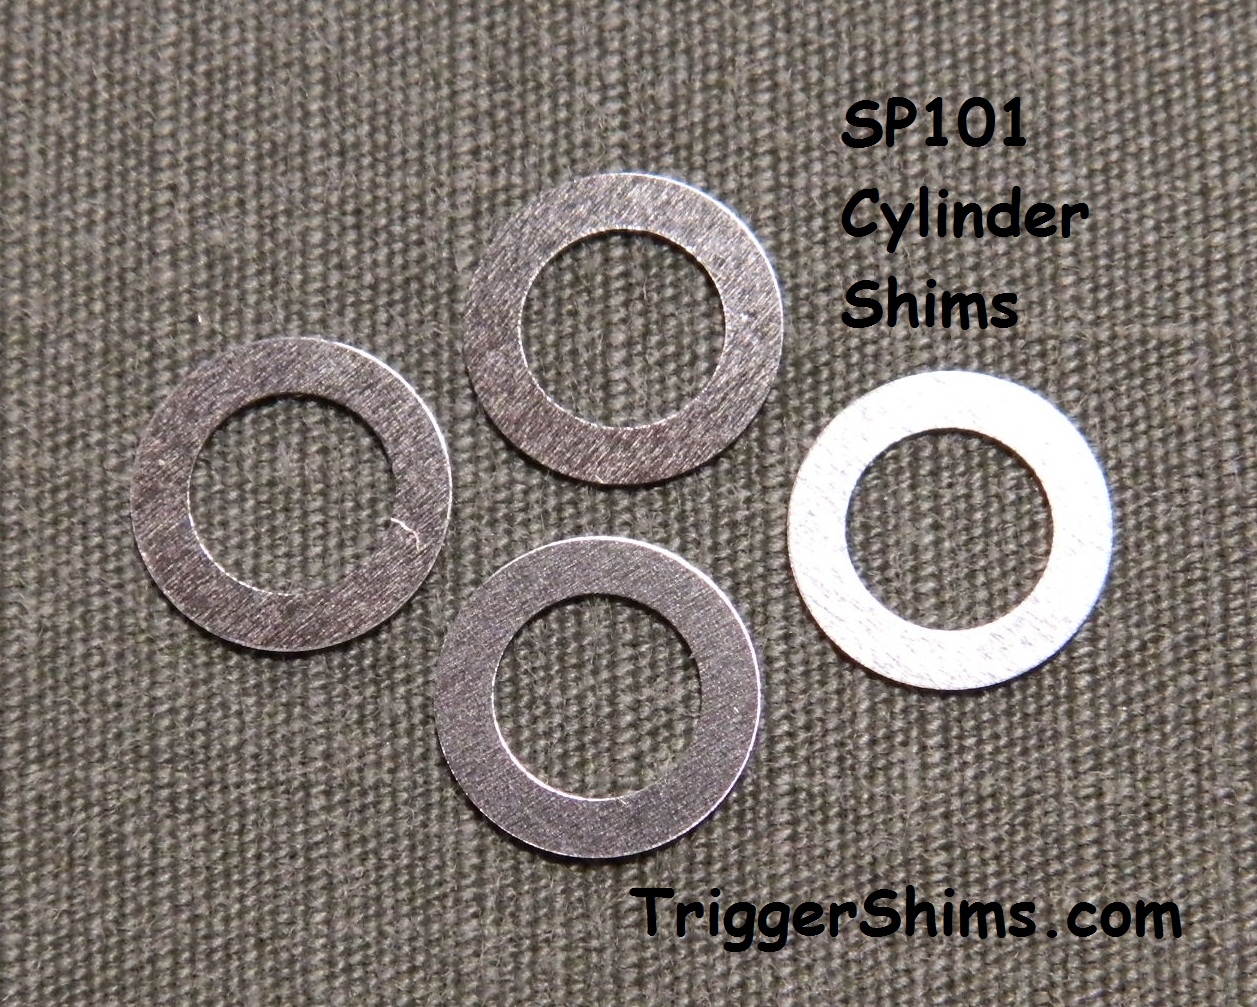 MTC Steel Cylinder Shims Compatible with Smith & Wesson K Eliminate Shake L N Frame Revolver